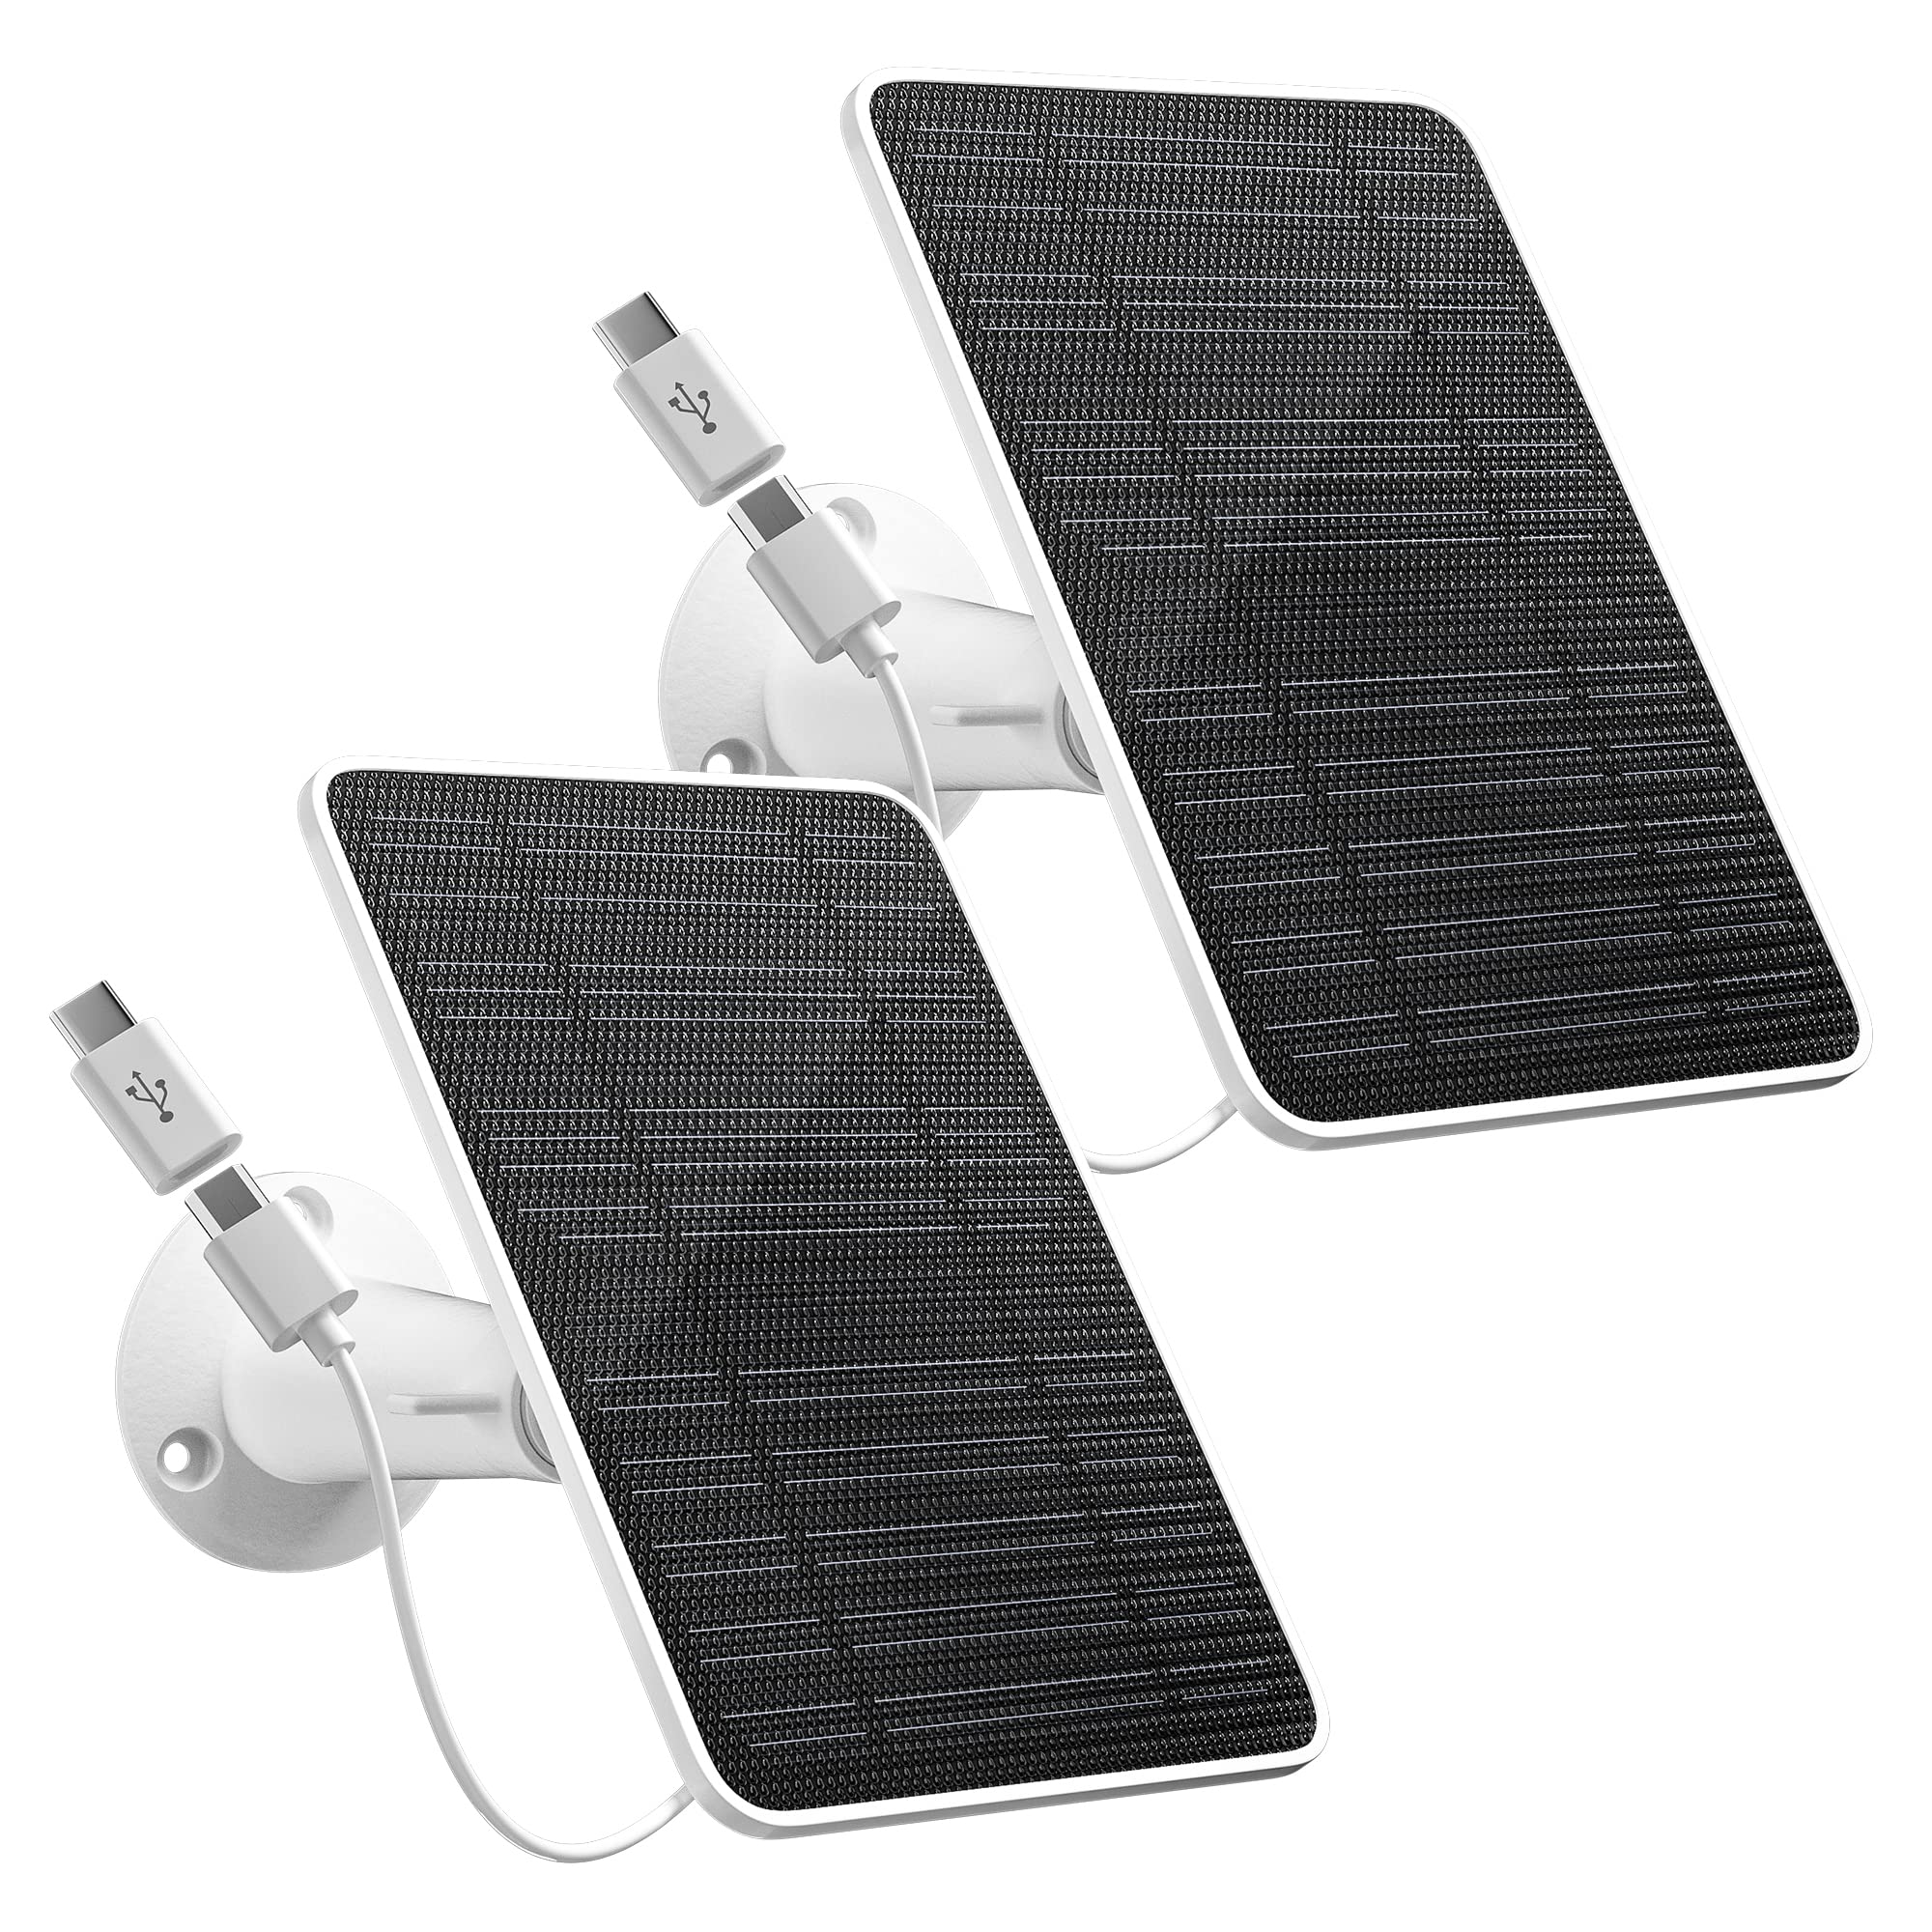 Empower Eufy Cameras with 5V 4W Solar Panels - Uninterrupted Power, IP65 Waterproof, 2 Pack for Ultimate Security